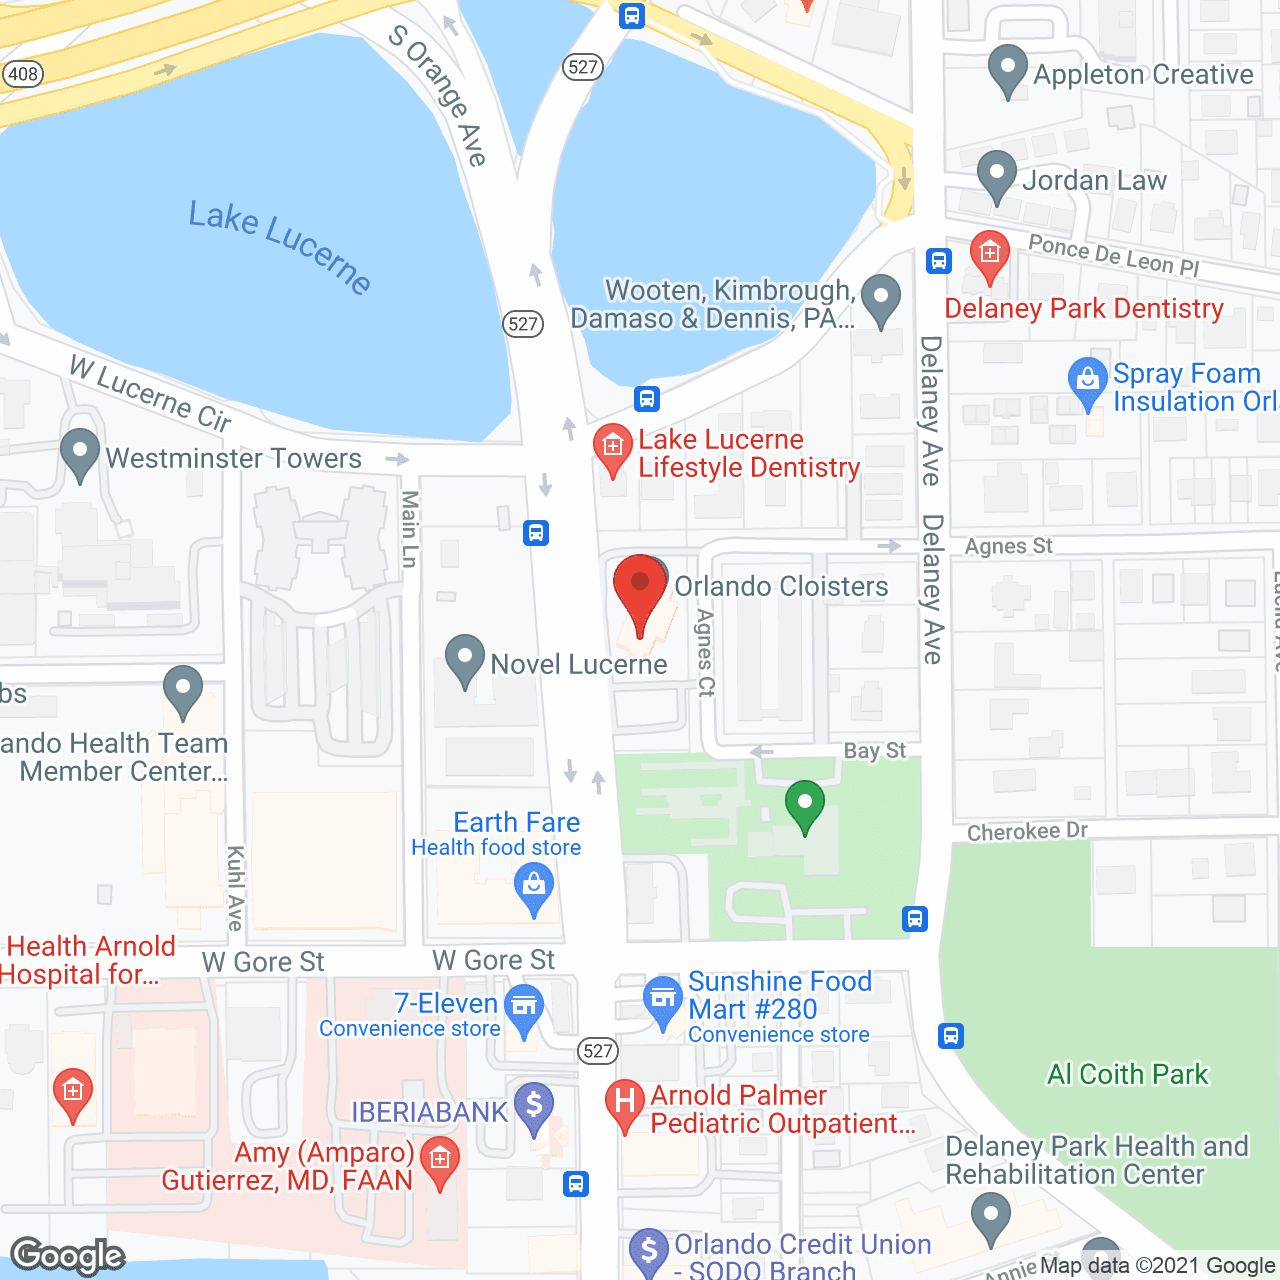 Orlando Cloisters in google map